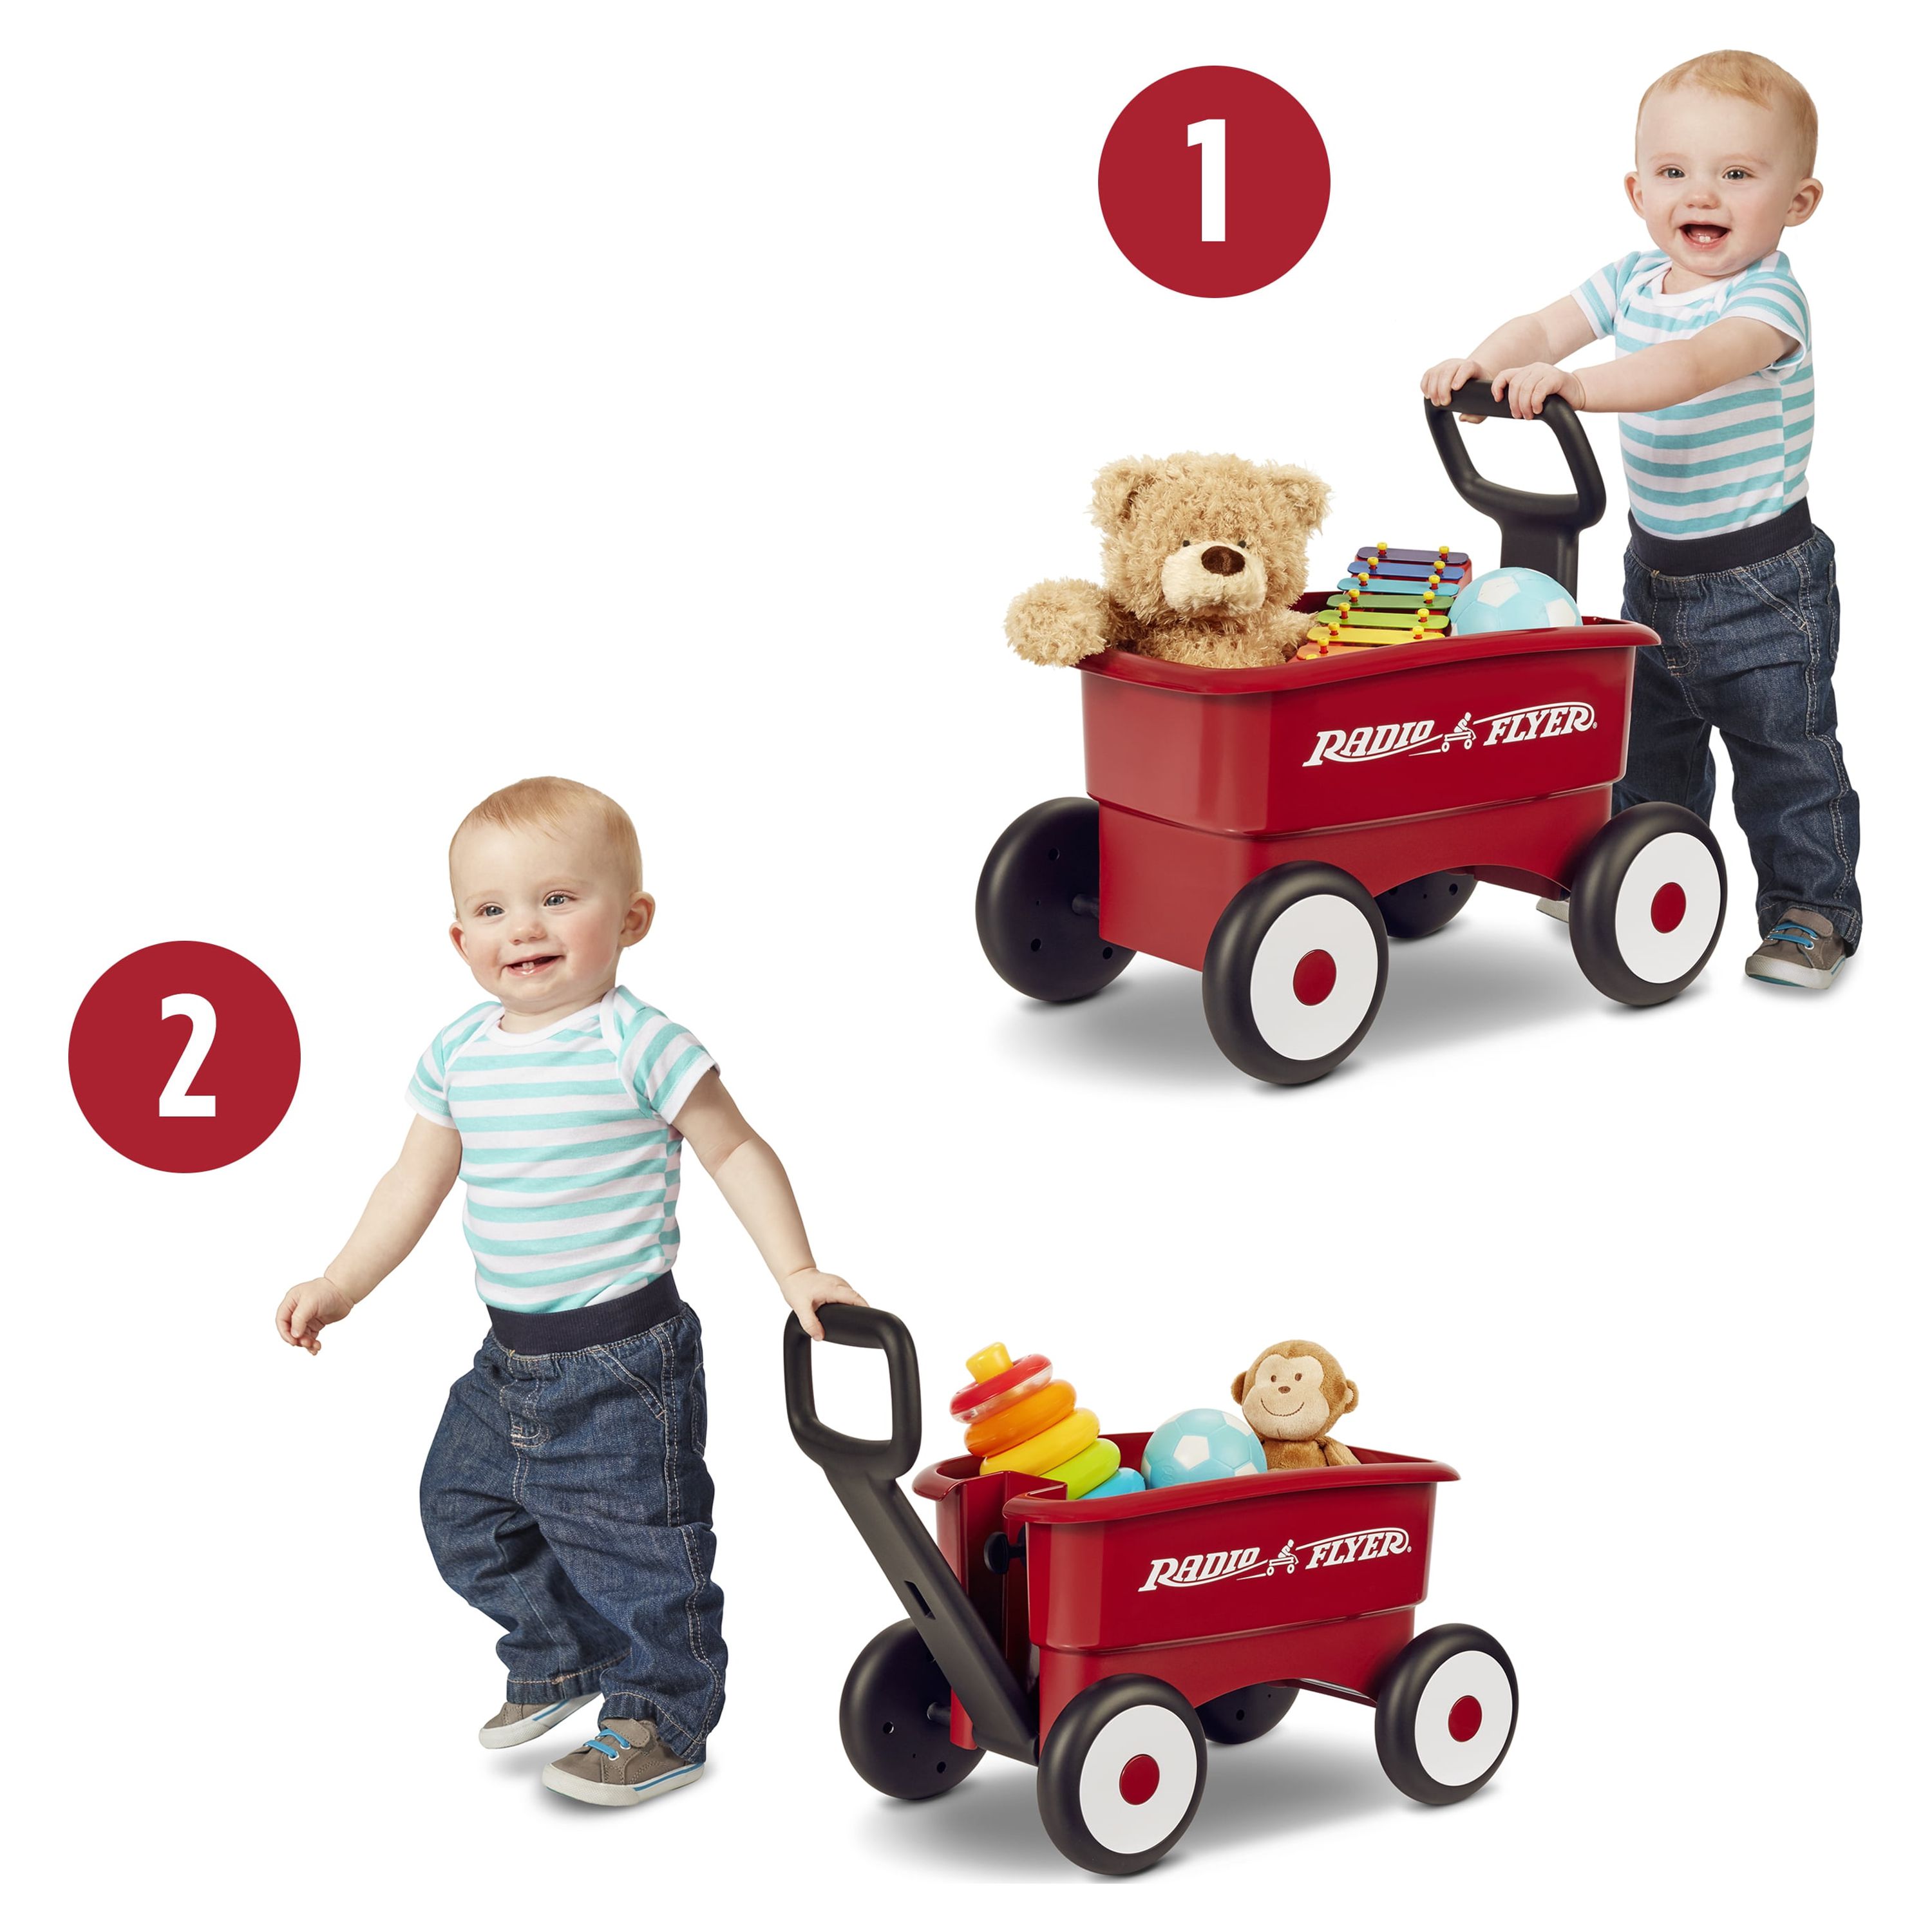 Radio Flyer, My 1st 2-in-1 Play Wagon Push Walker, Red - image 5 of 9